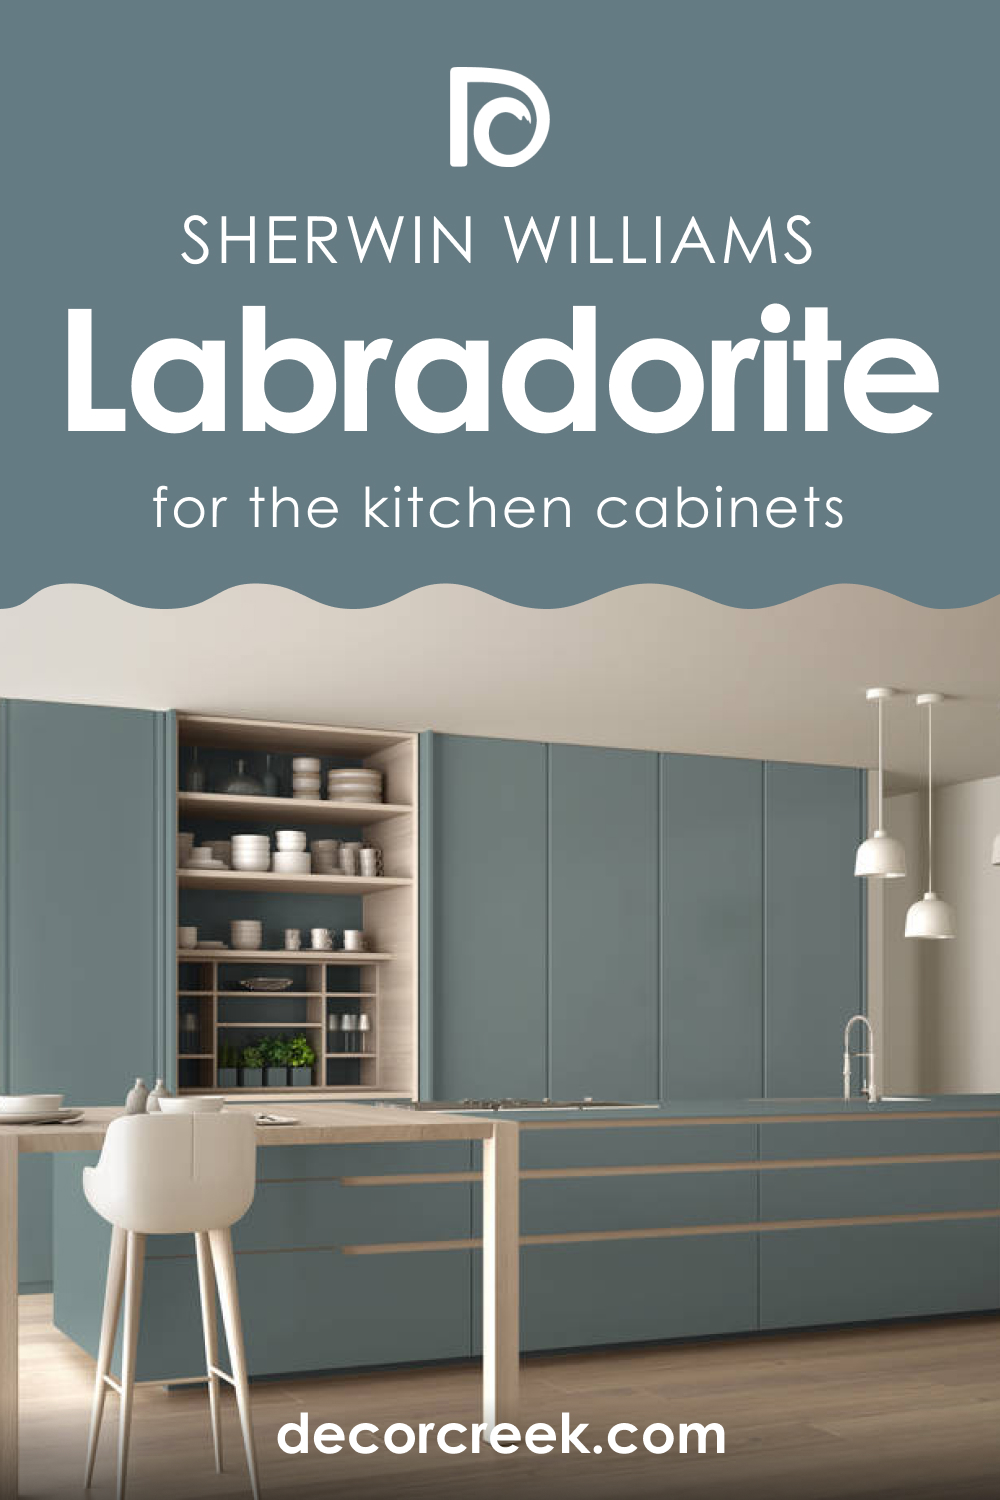 How to Use SW 7619 Labradorite for Kitchen Cabinets